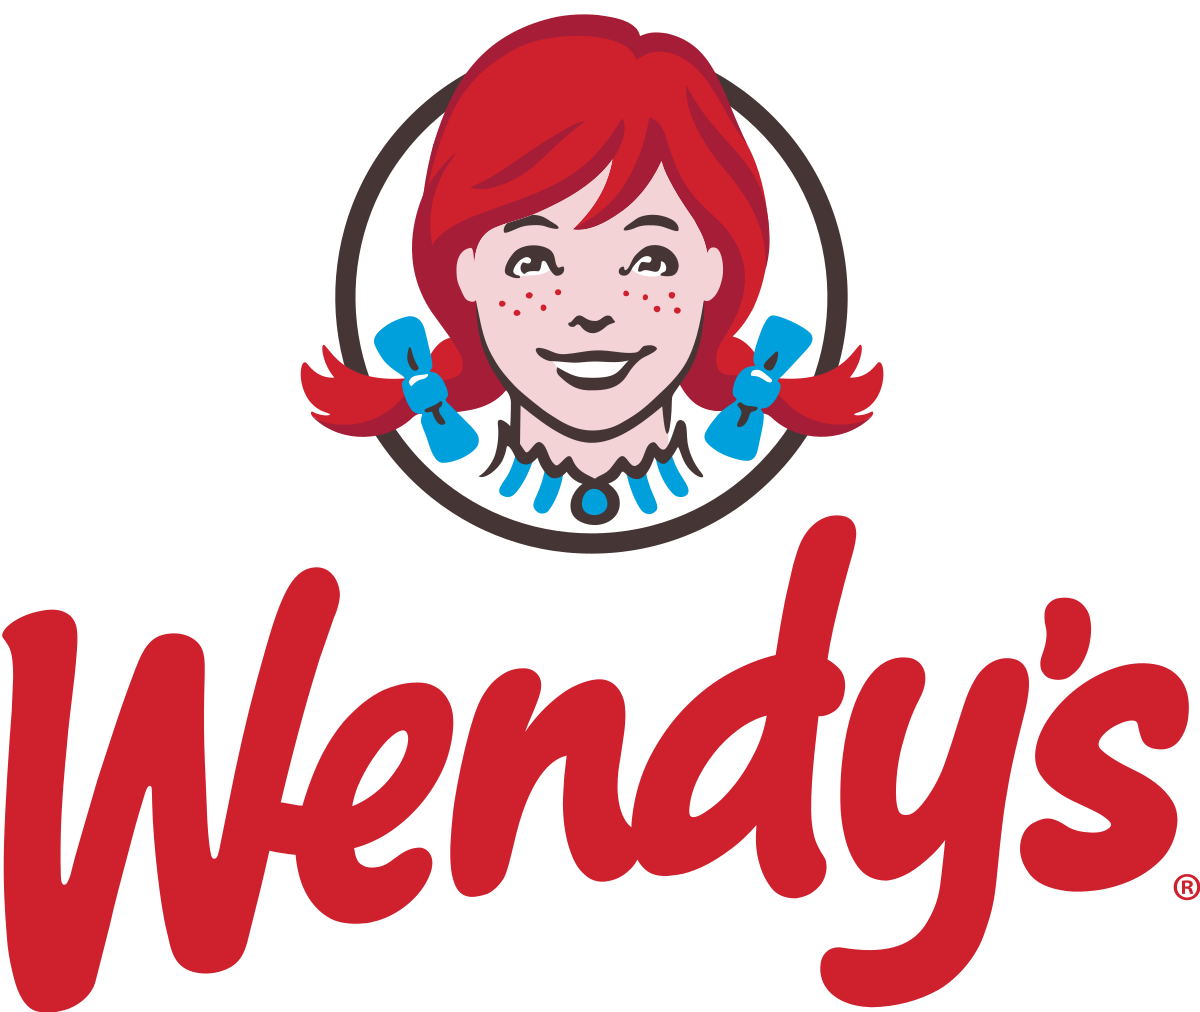 2301292 ALBERTA LTD. is based in Edmonton and affiliated to Wendy's (Wendy's is a popular fast food chain in Canada that is known for its fresh, never frozen beef burgers and Frosty desserts.)